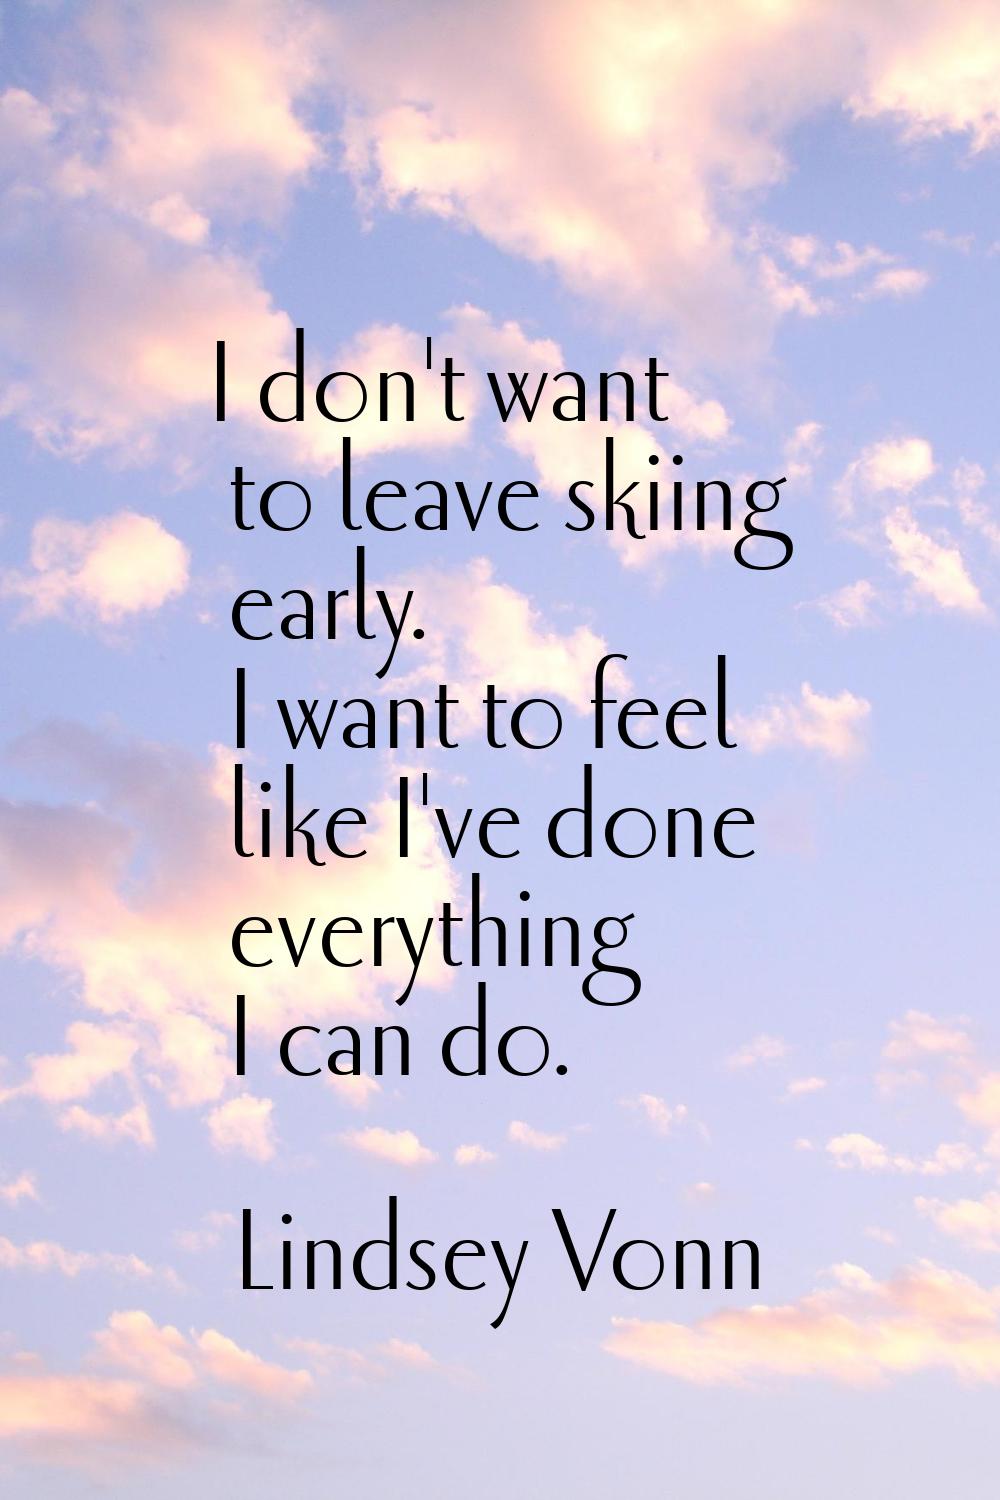 I don't want to leave skiing early. I want to feel like I've done everything I can do.